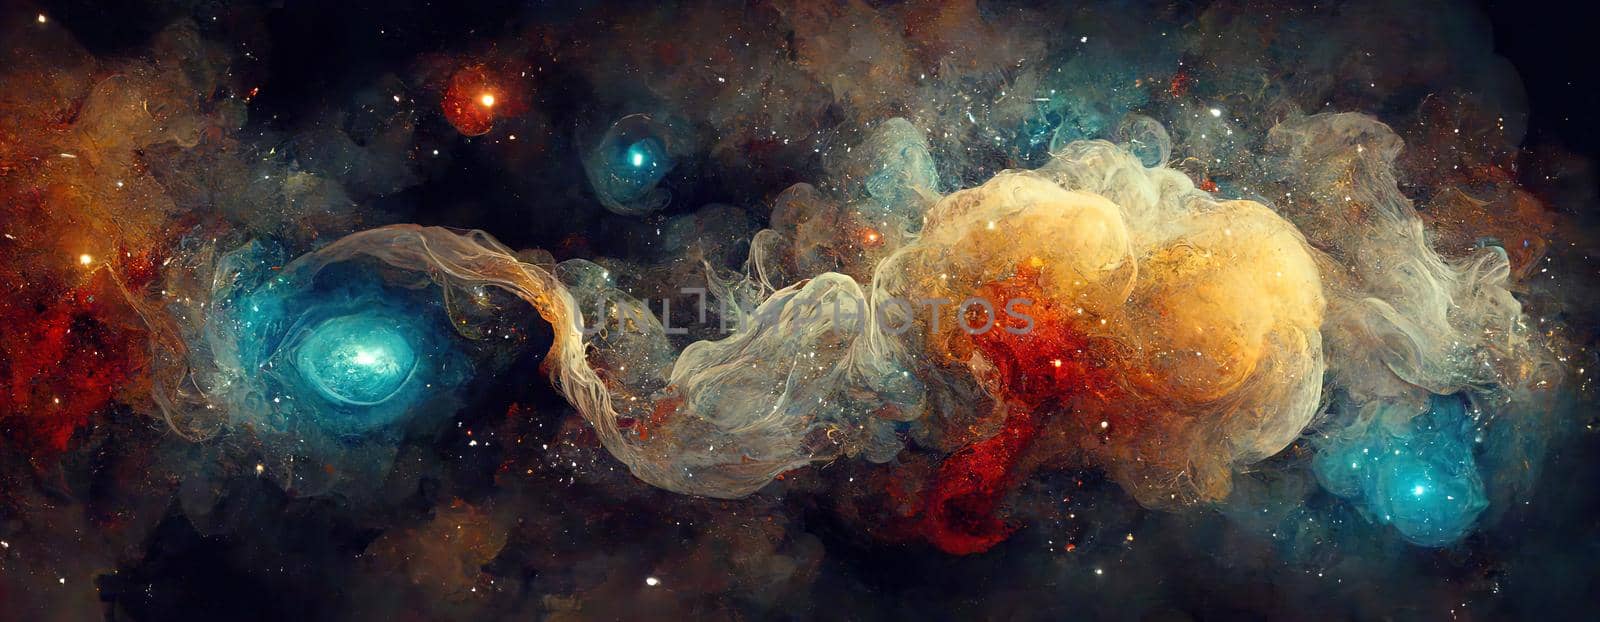 abstract space theme with galaxies and stars and nebulae by TRMK